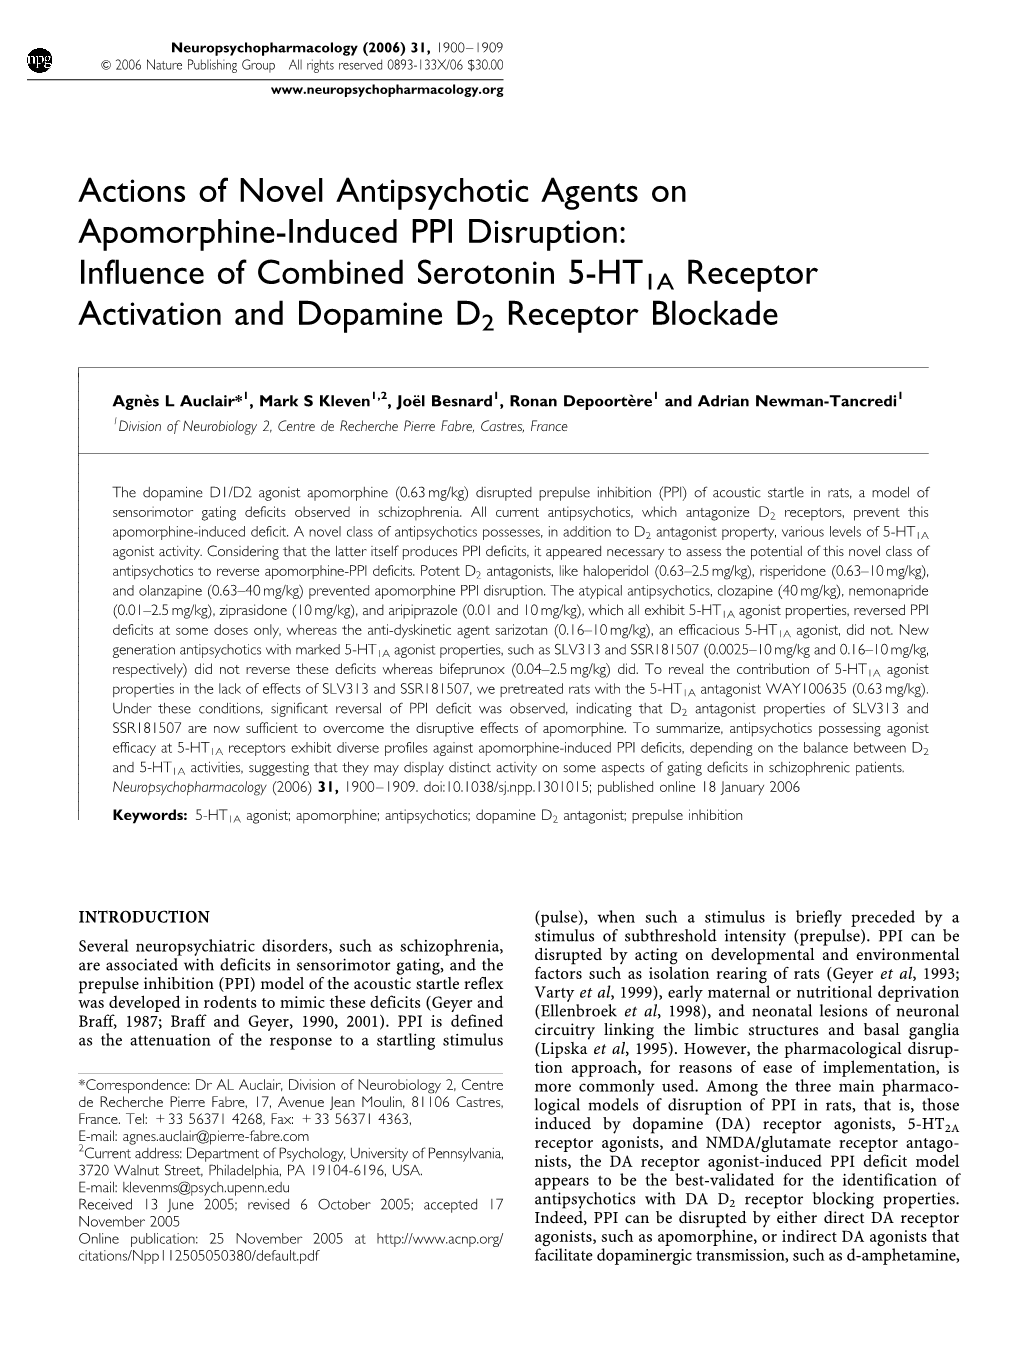 Actions of Novel Antipsychotic Agents on Apomorphine-Induced